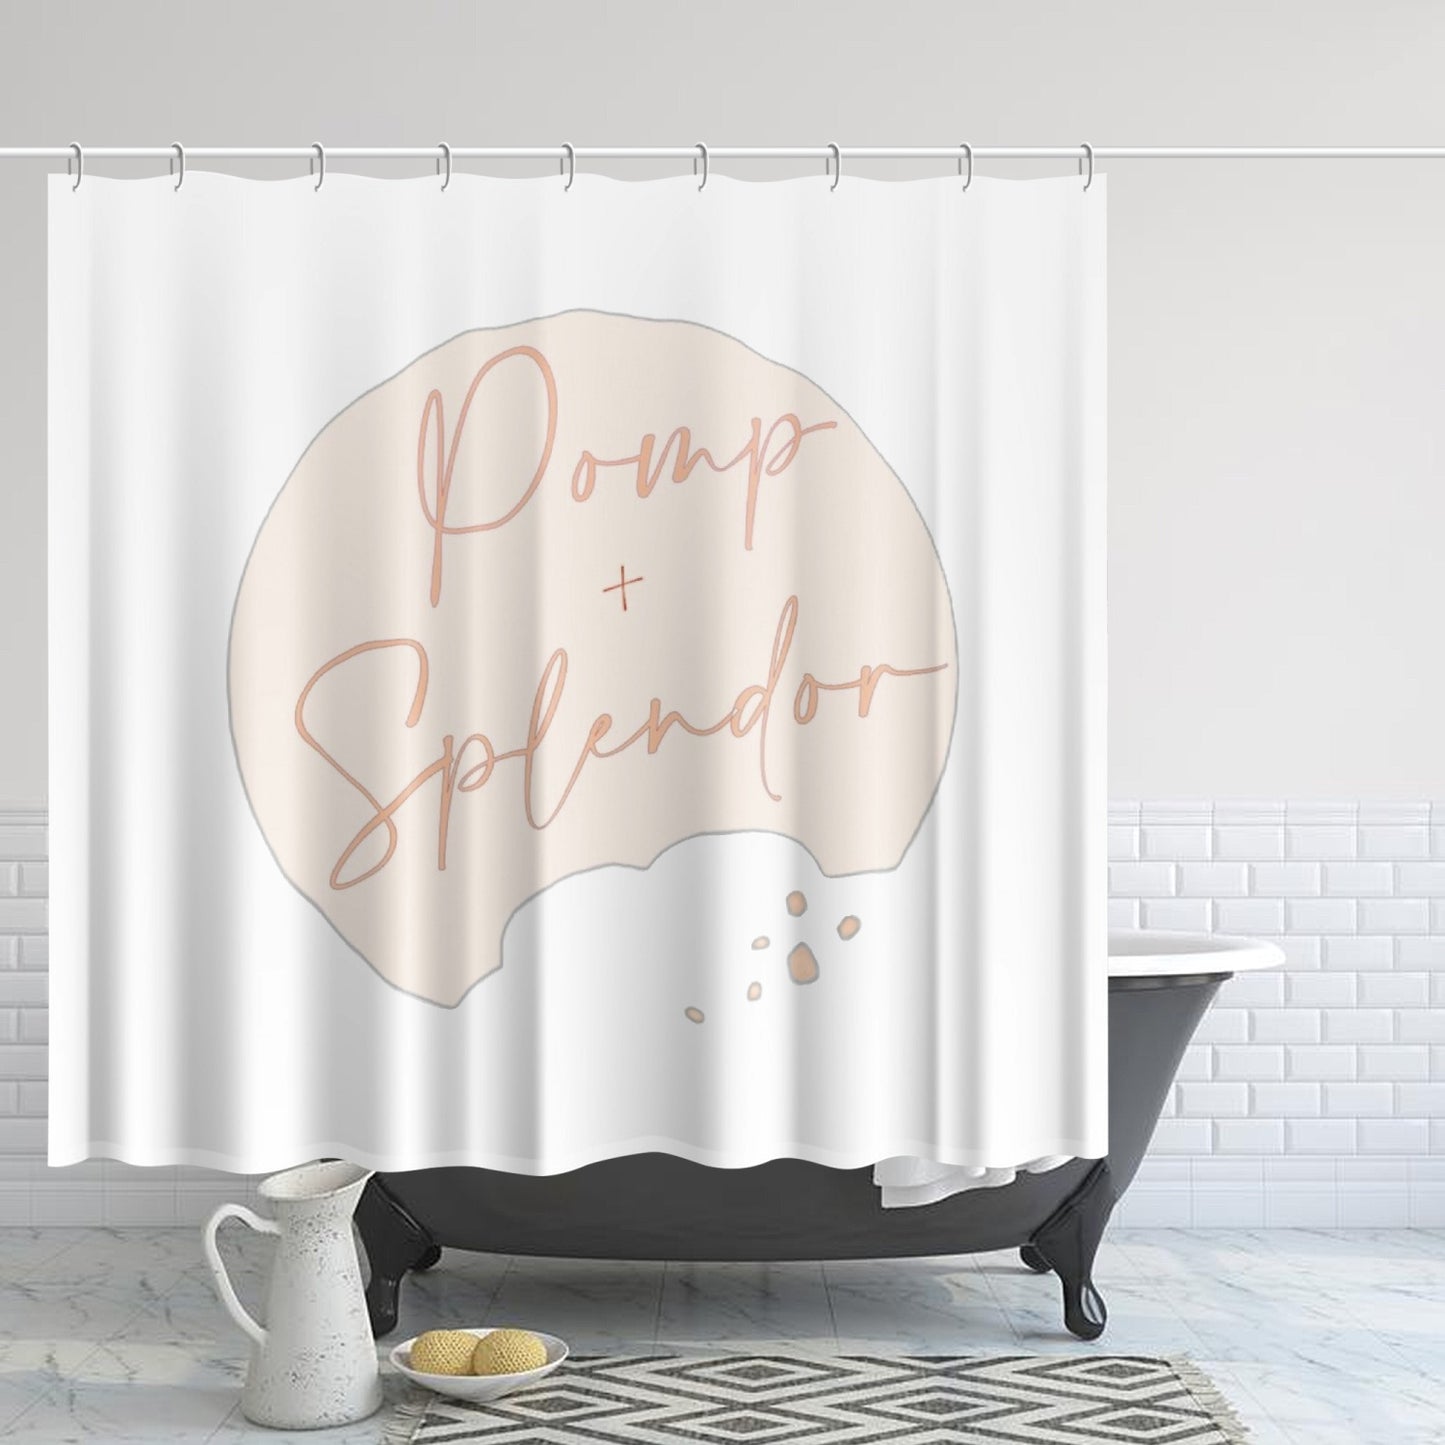 172. Quick-drying Shower Curtain